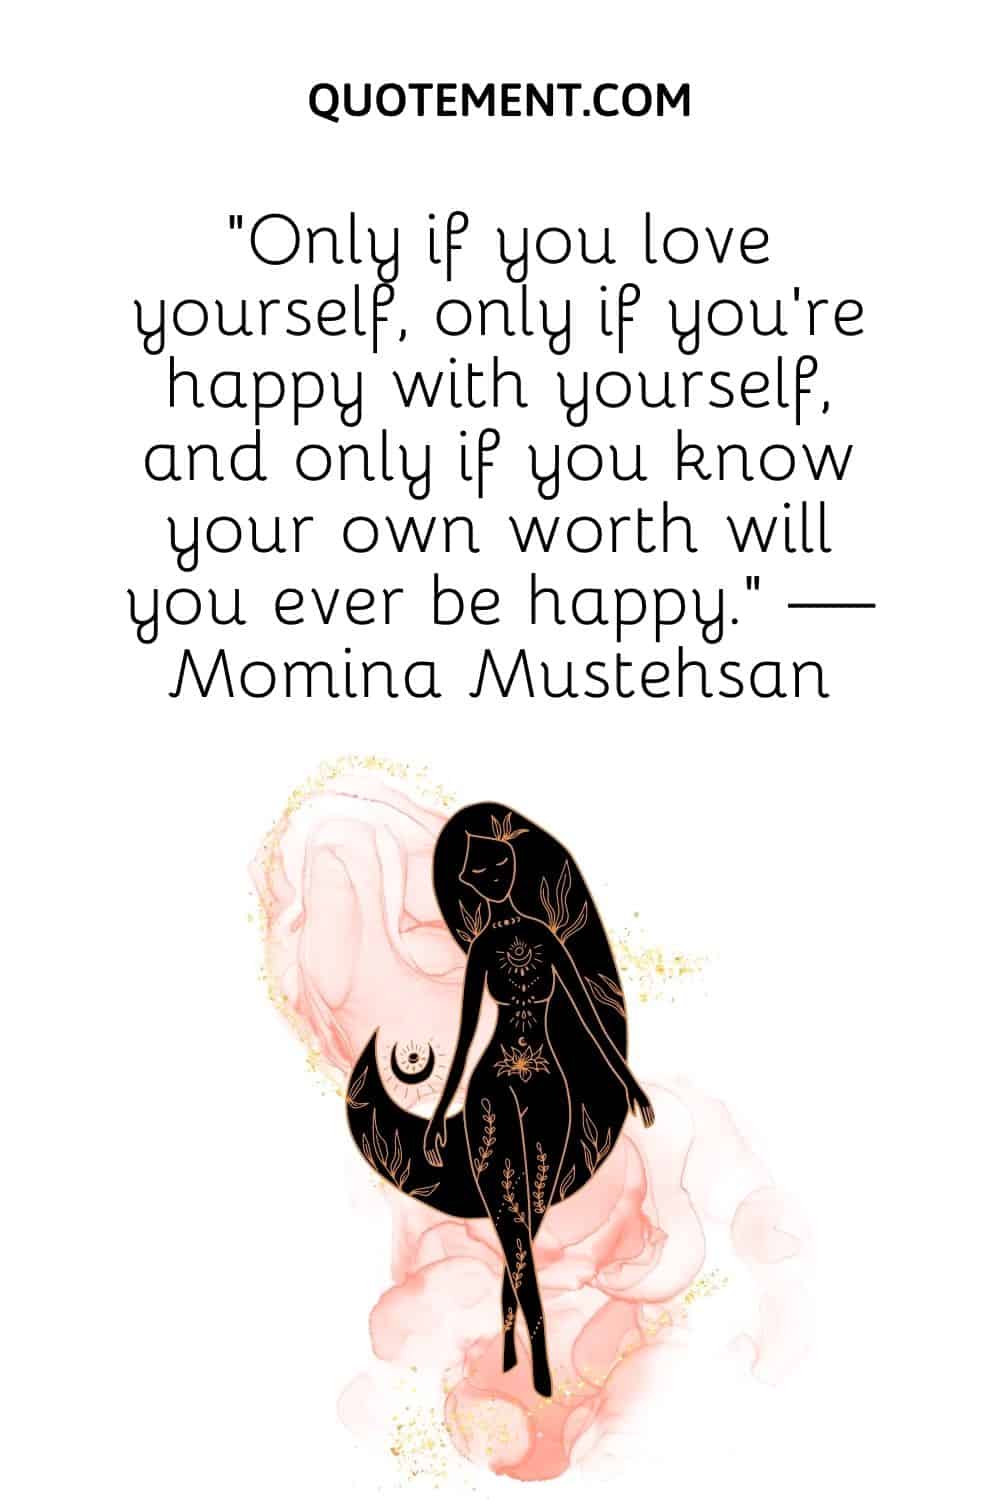 Only if you love yourself, only if you’re happy with yourself, and only if you know your own worth will you ever be happy